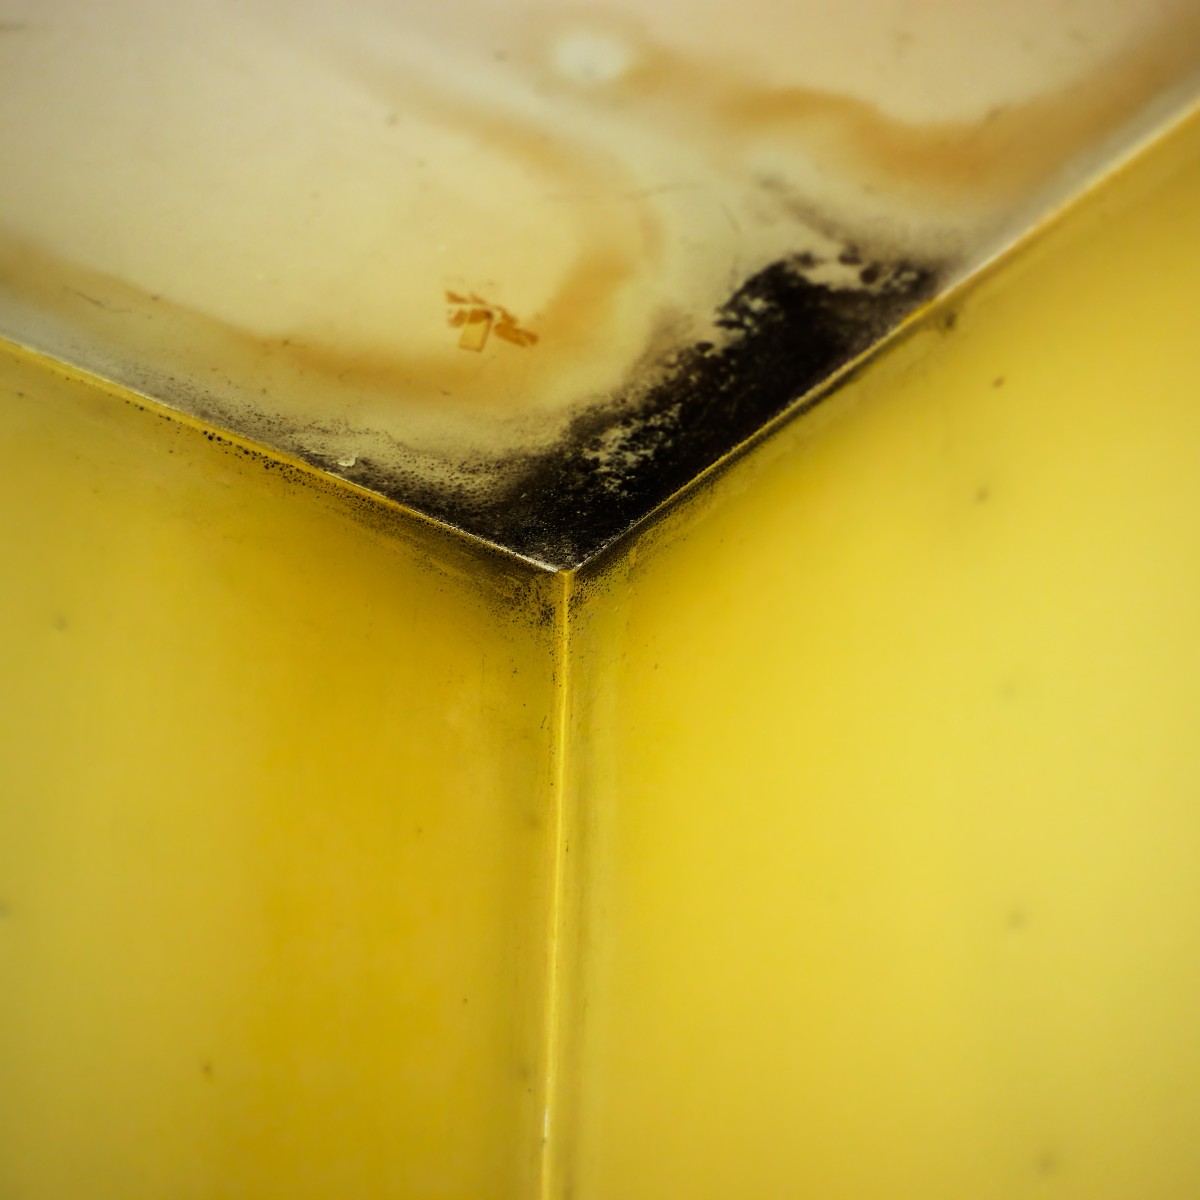 black mold in corner of room painted yellow, Archival pigment print on cotton fibre paper by Greg Staats